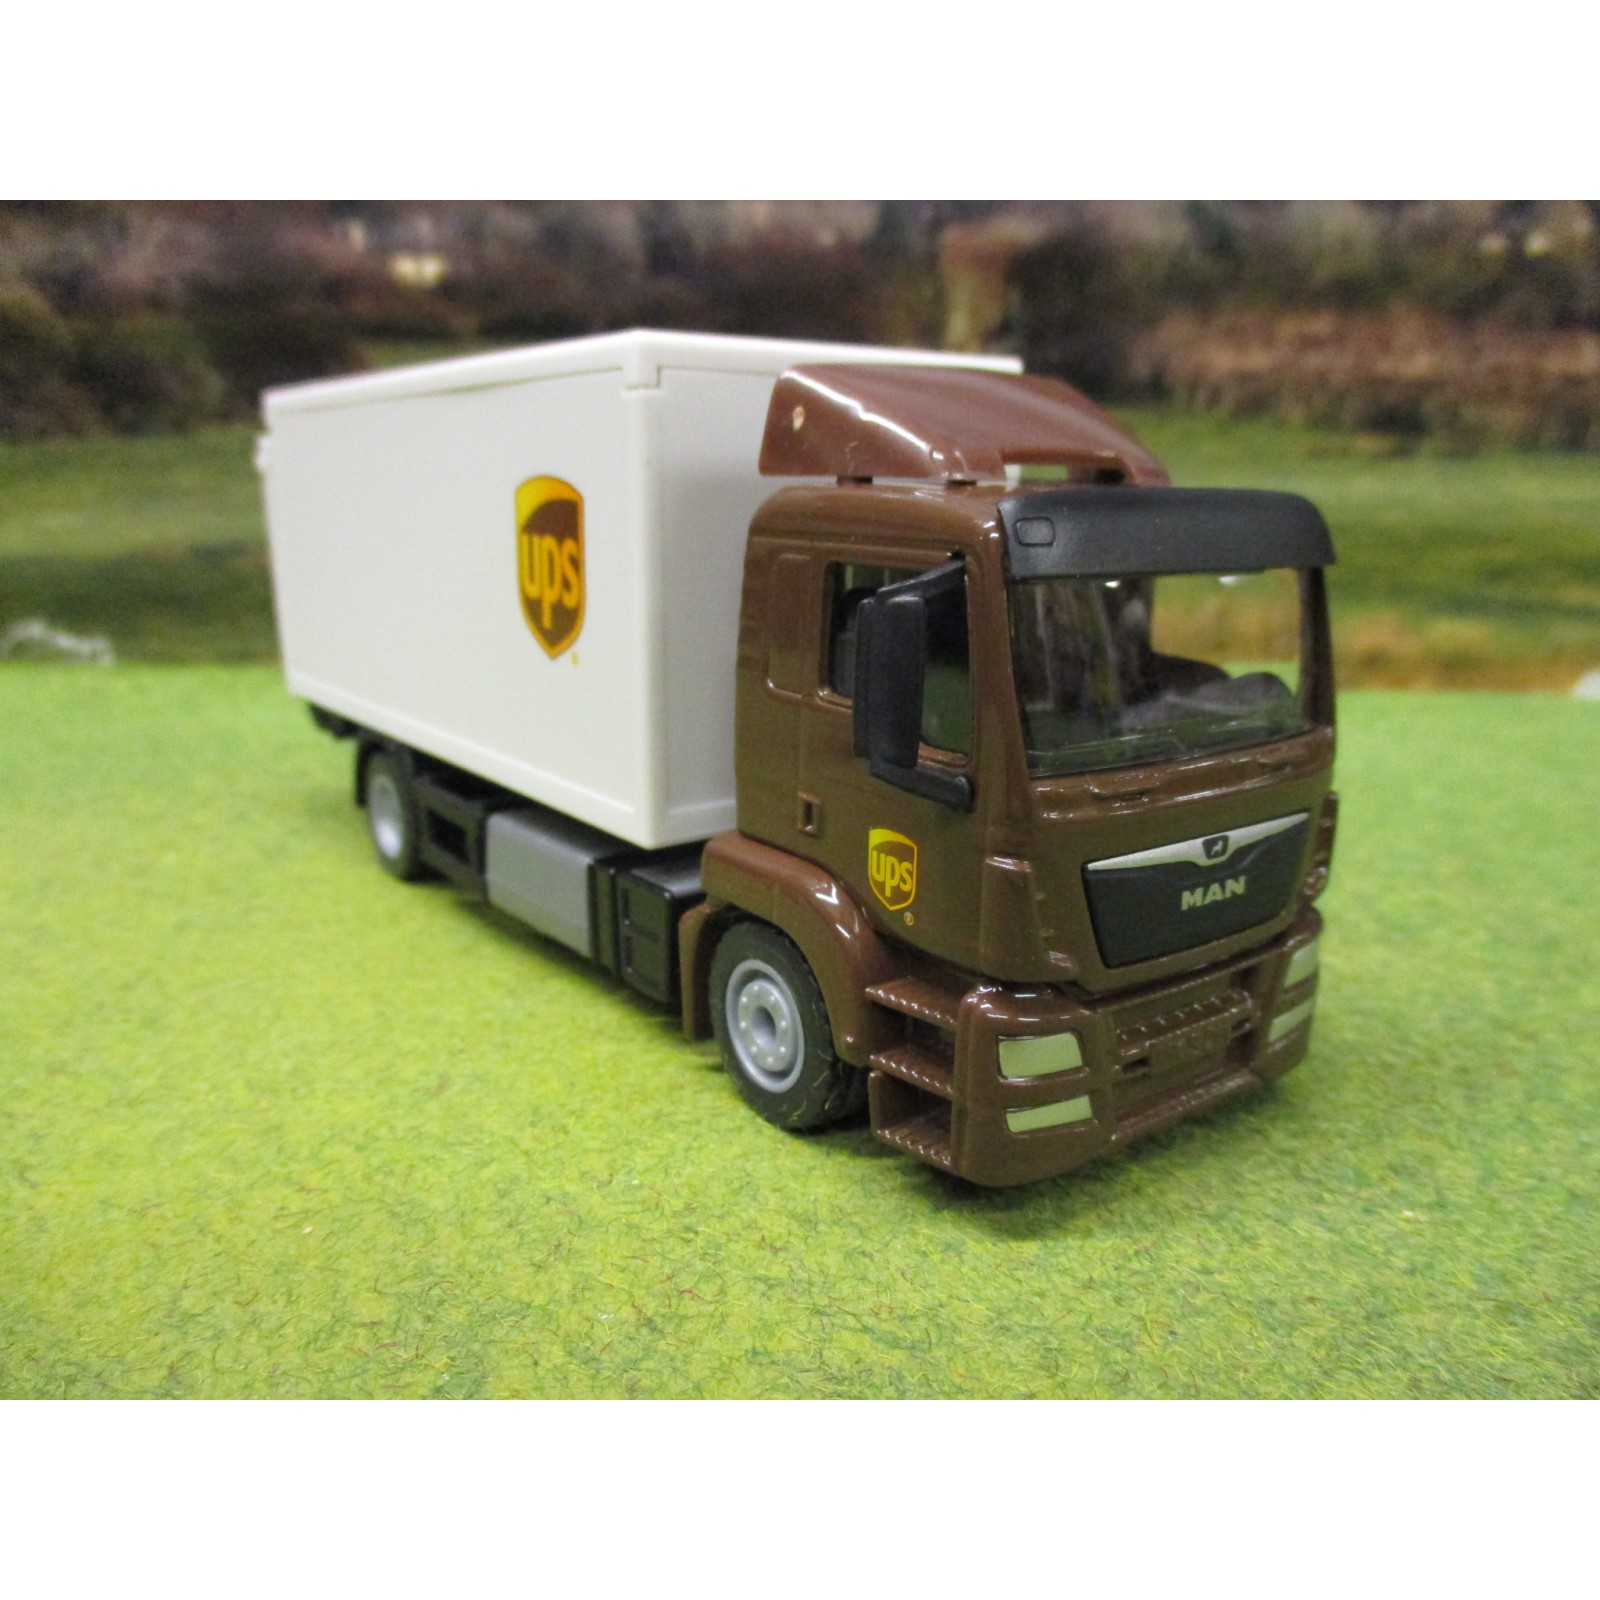 SIKU 1:50 MAN LKW FOUR WHEELER UPS DELIVERY LORRY - One32 Farm toys and  models